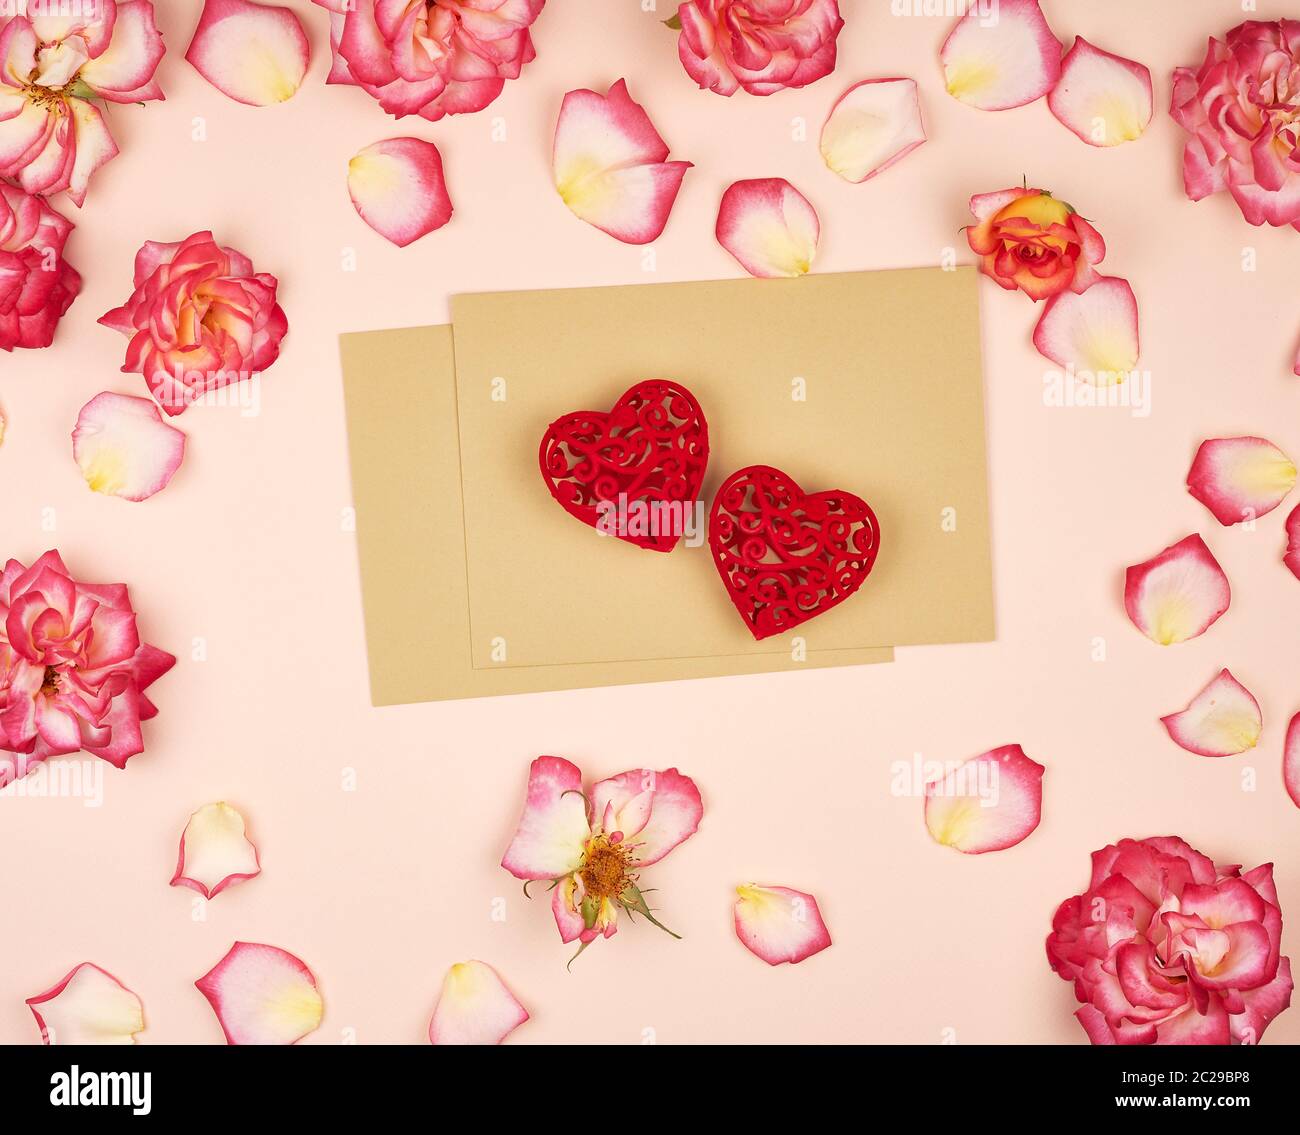 brown paper envelopes and two red carved hearts in the middle of rosebuds, top view, festive backdrop Stock Photo